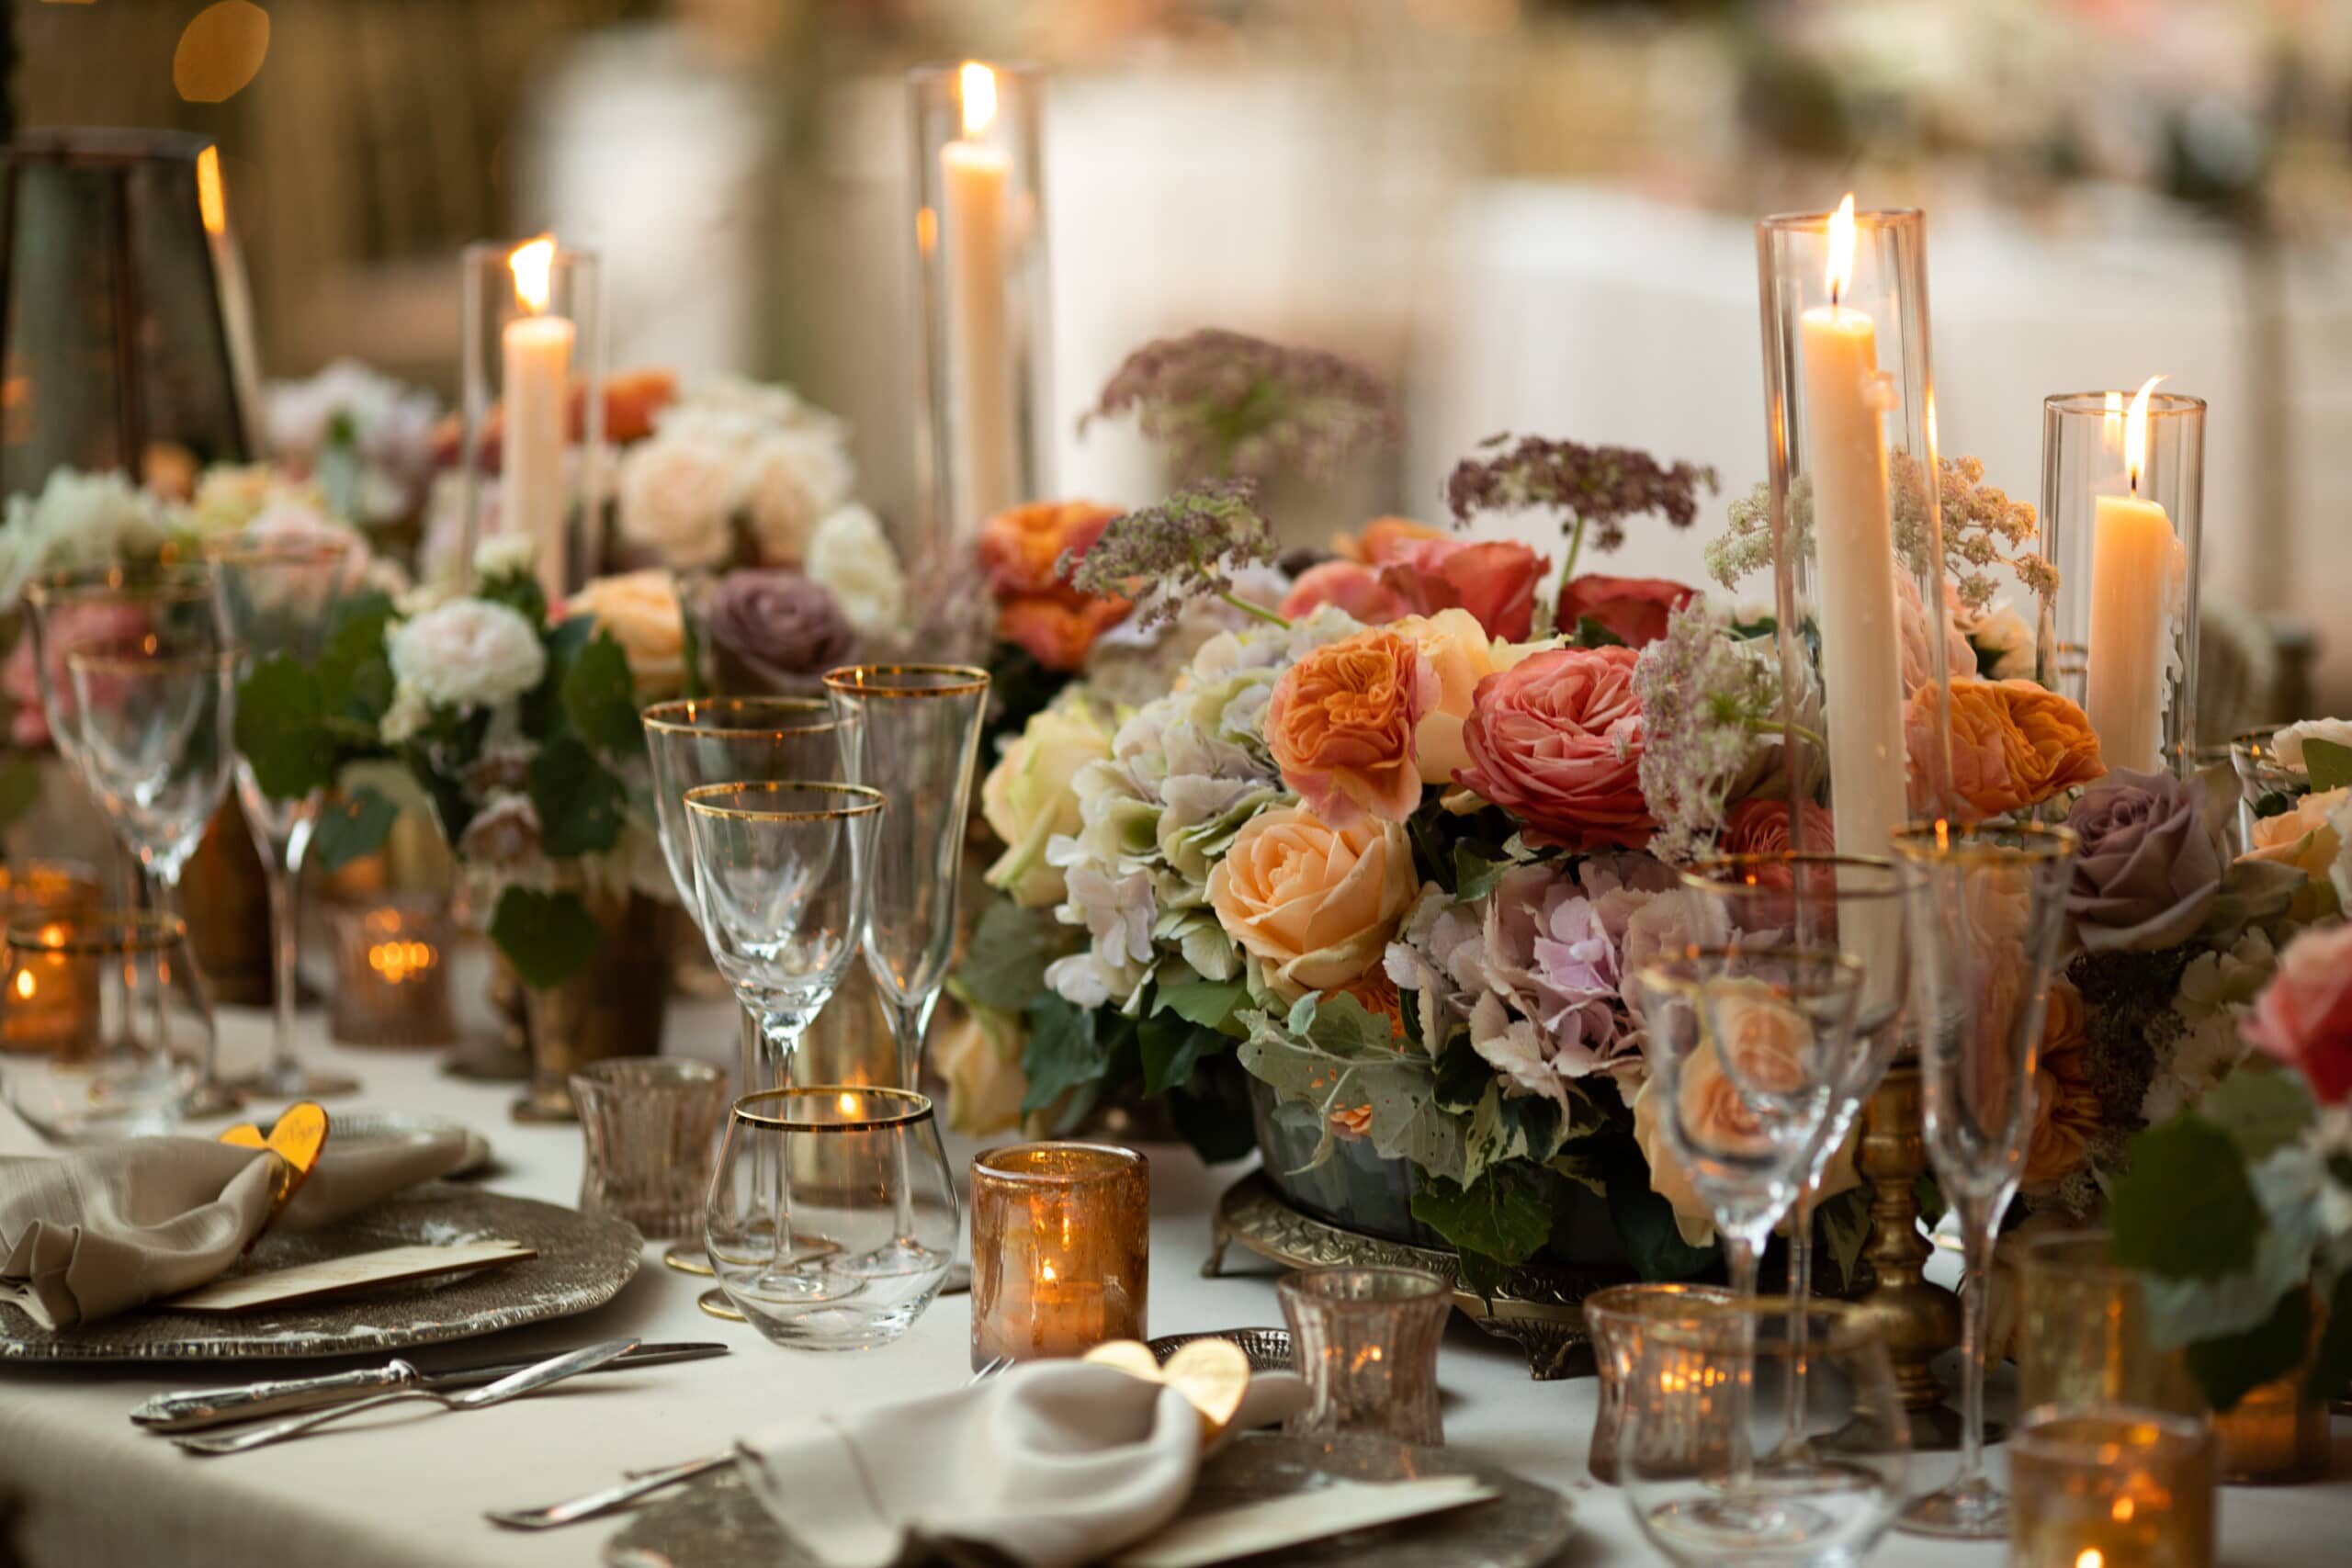 Salmon, peach and violet flowers palette for a wedding table decor in Italy